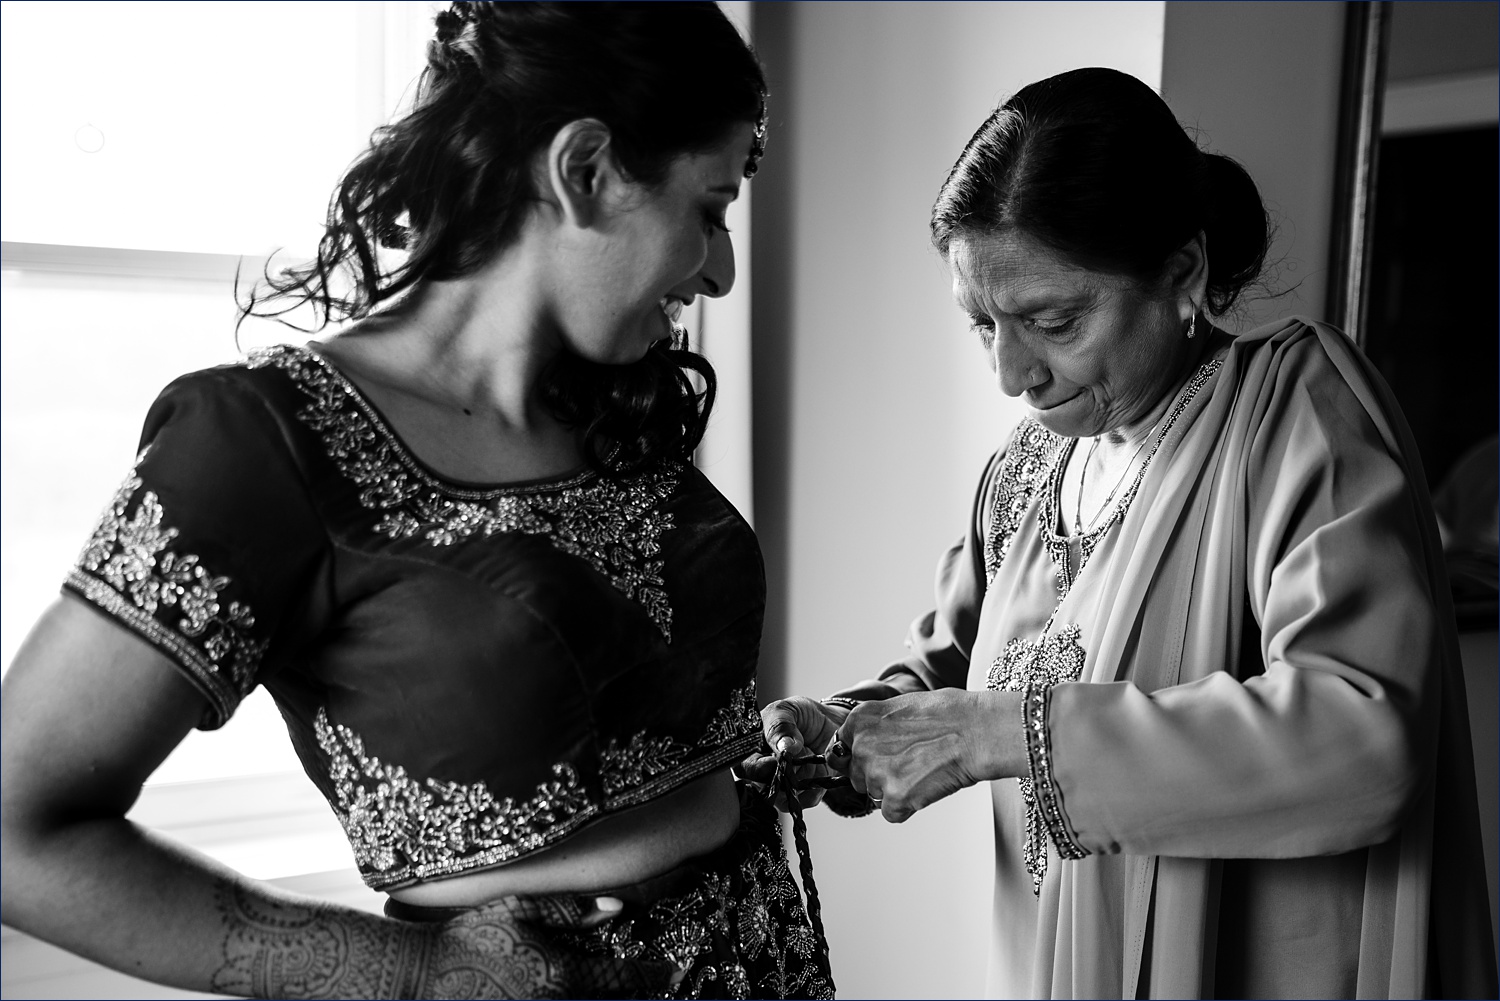 The bride's mother helps her get into her Hindu wedding attire in New Hampshire